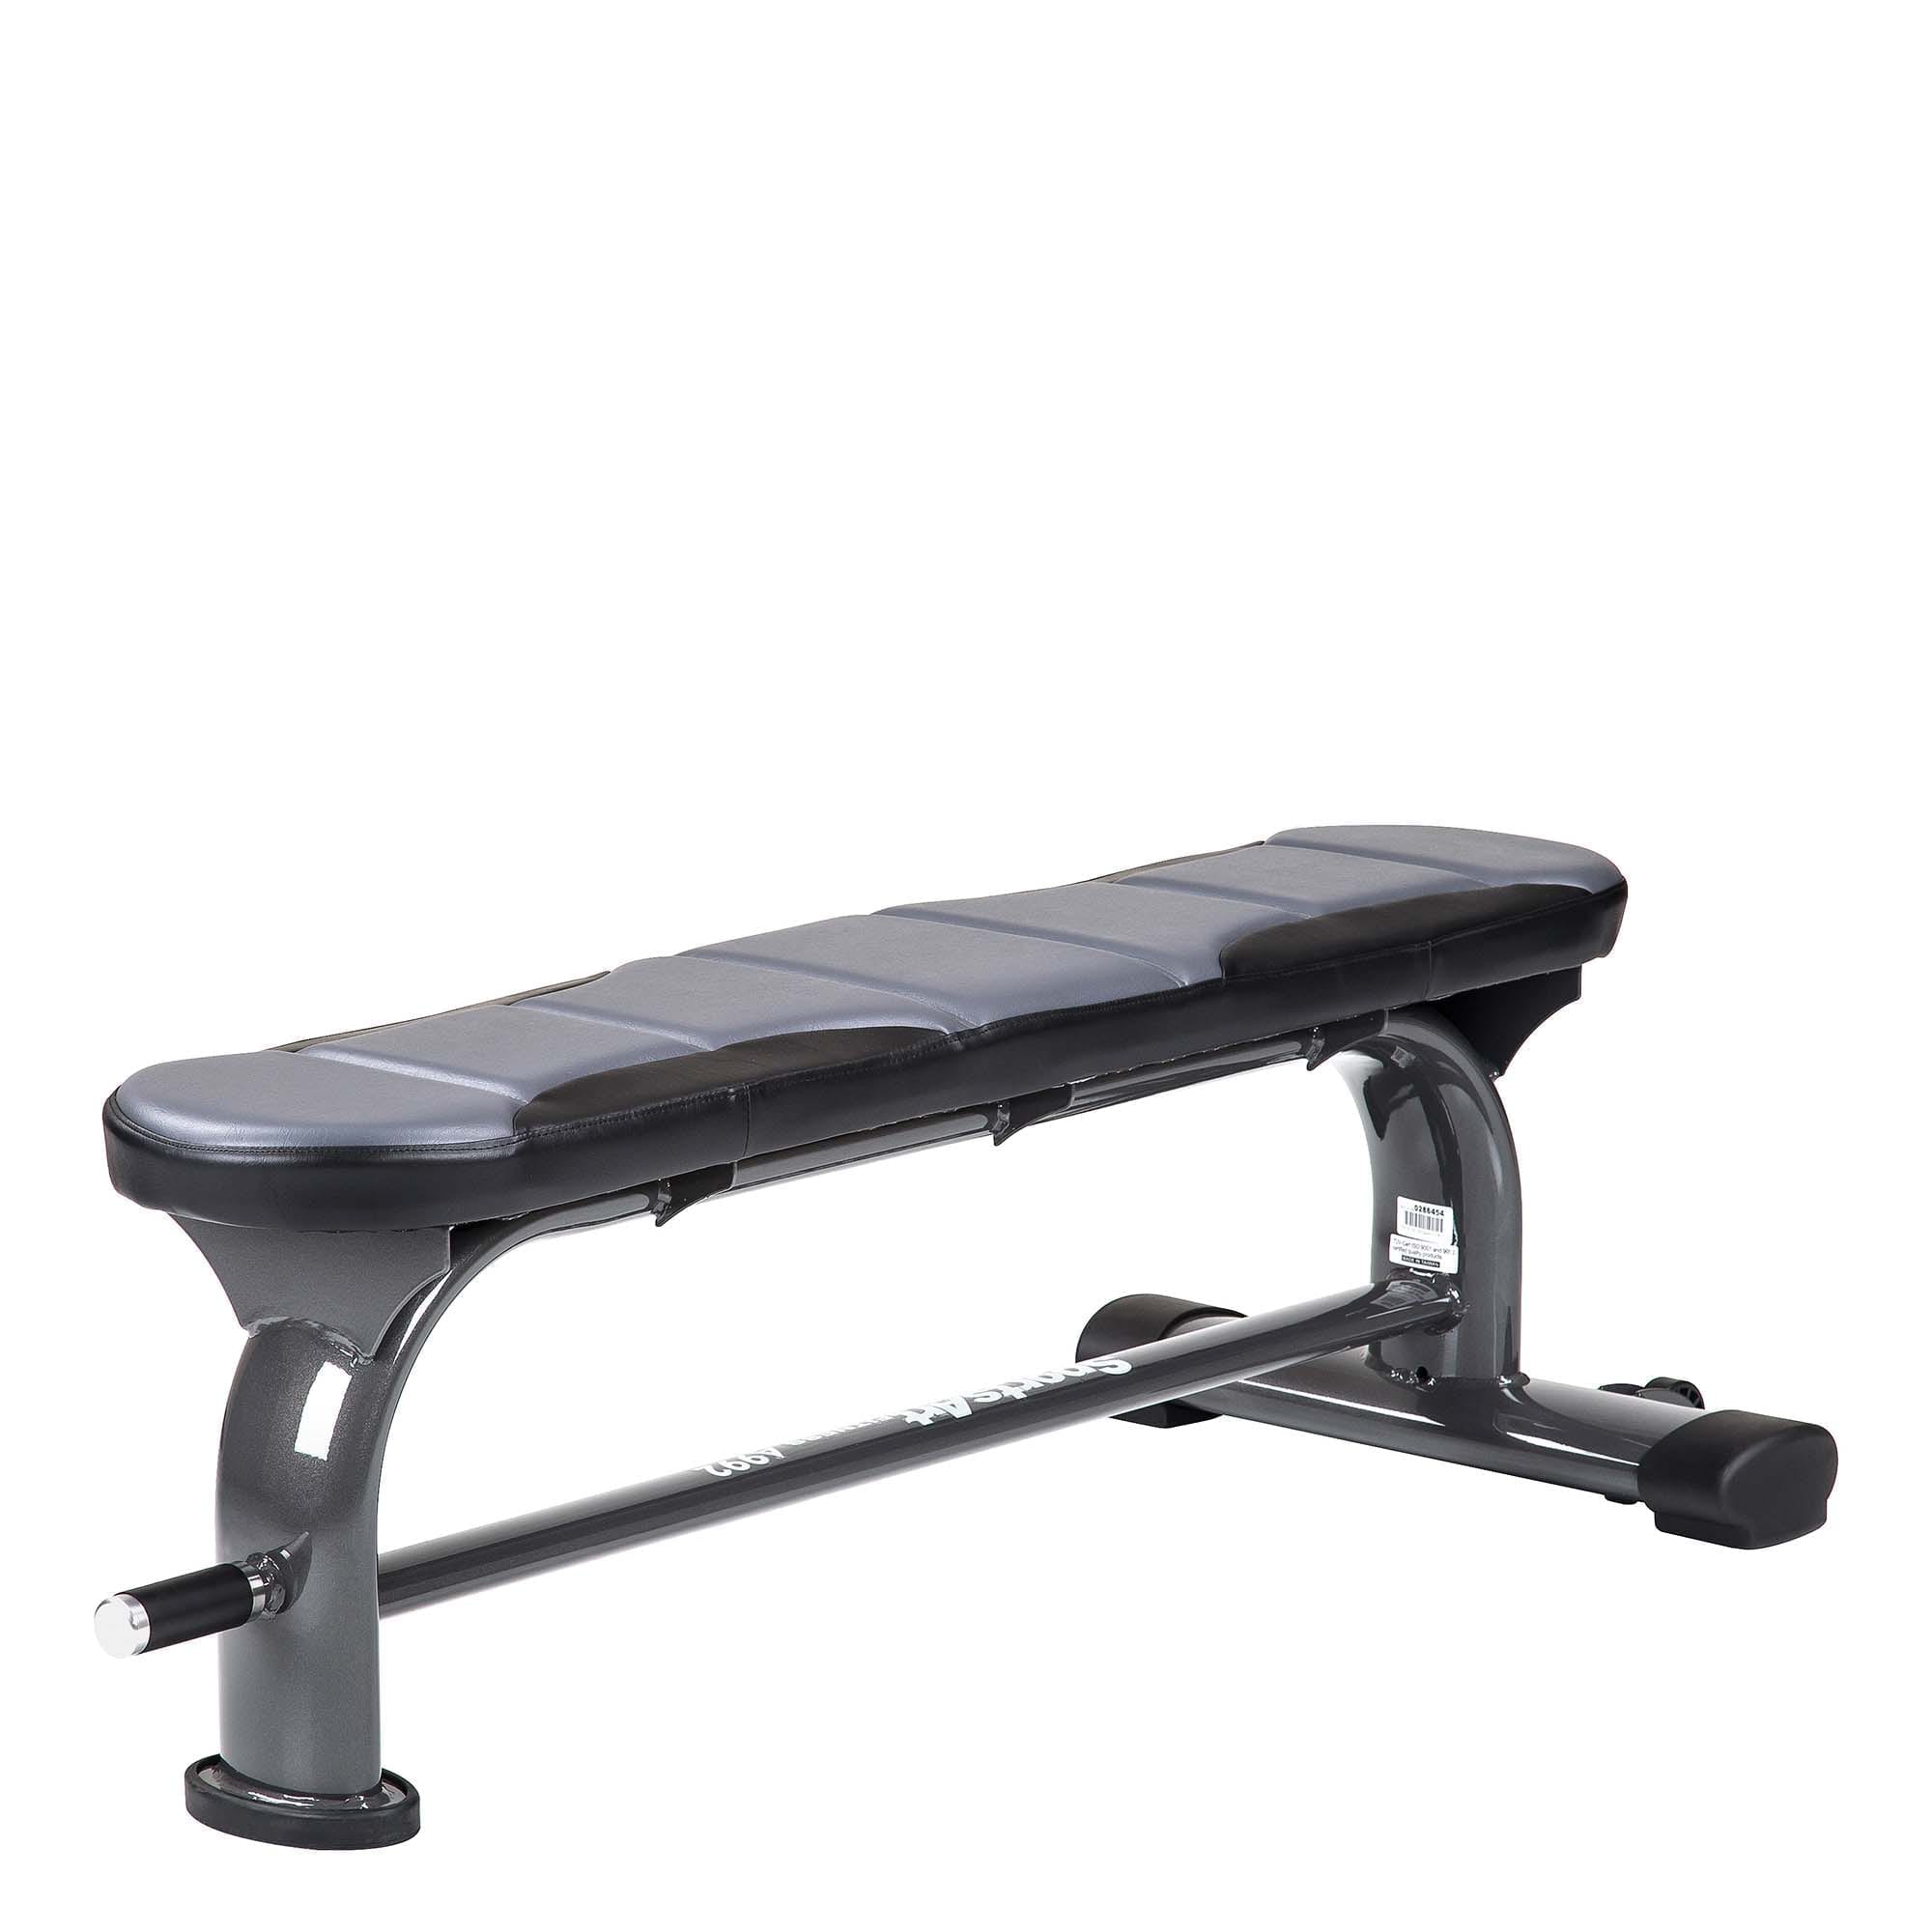 FLAT UTILITY WEIGHT BENCH – SPORTSART (A992) 1